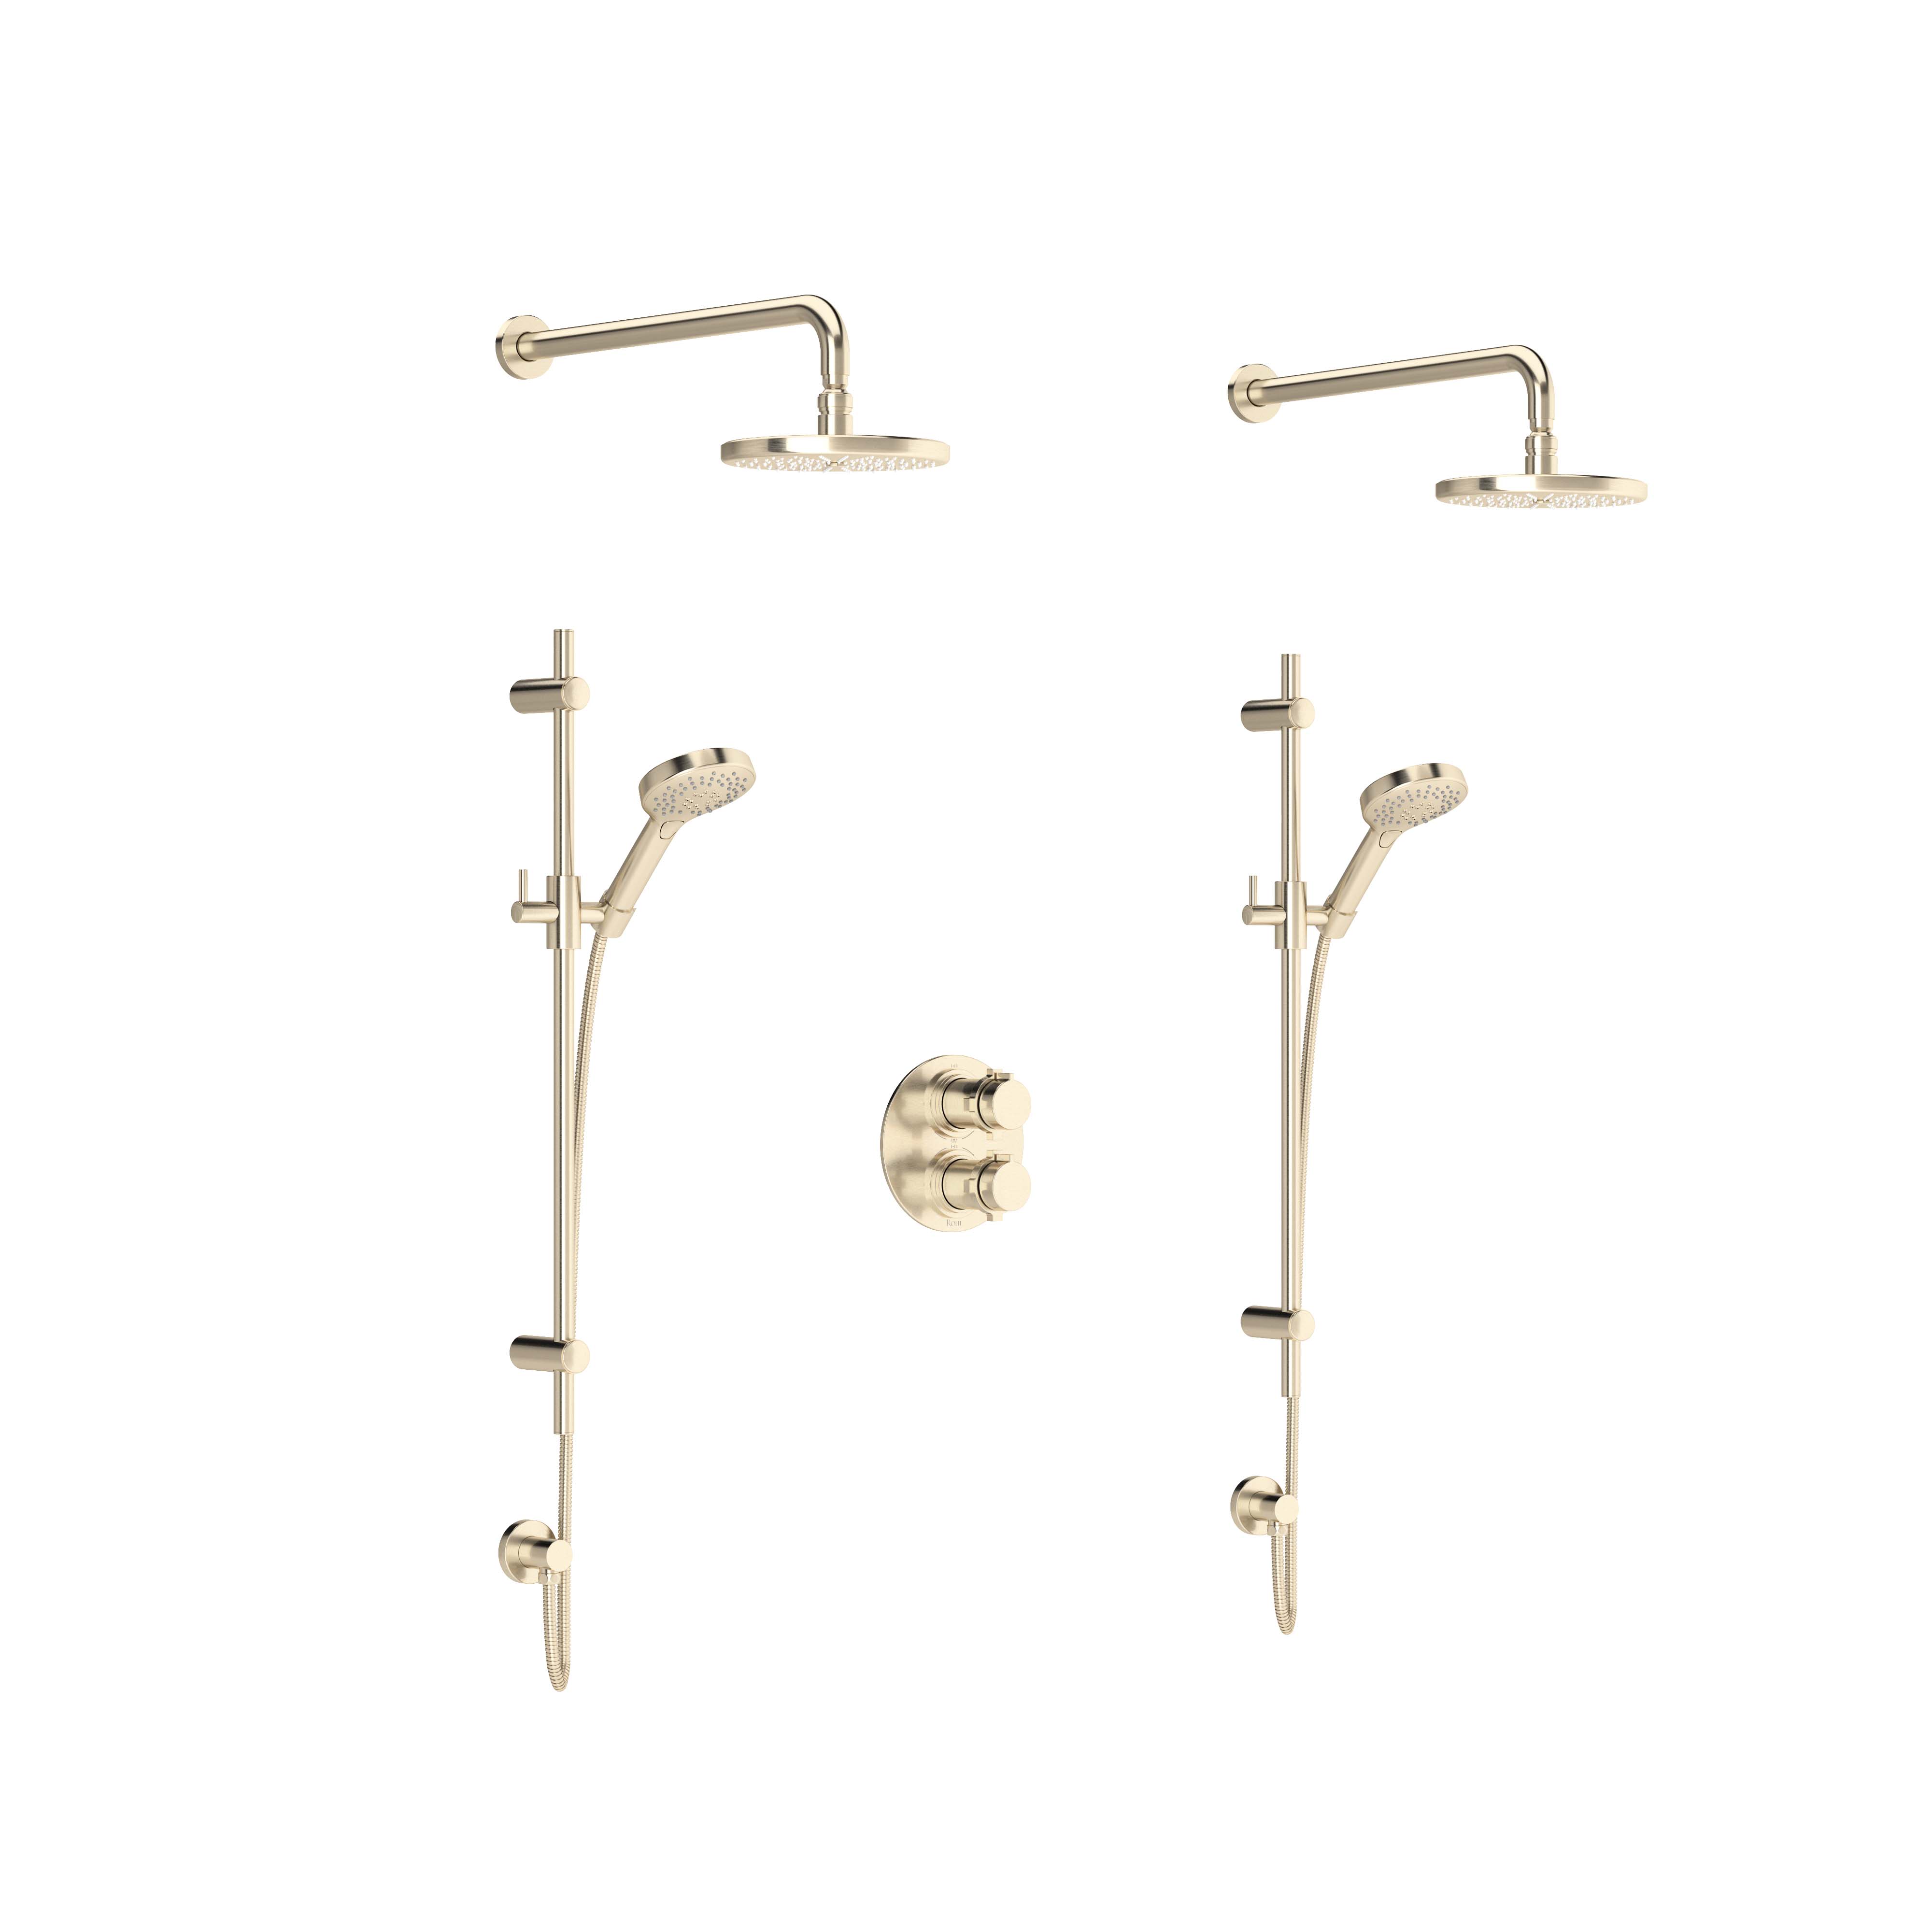 Rohl LOMBARDIA-TLB46W1XMPN-KIT Polished Nickel Lombardia Thermostatic Shower  System with Shower Head and Hand Shower - FaucetDirect.com